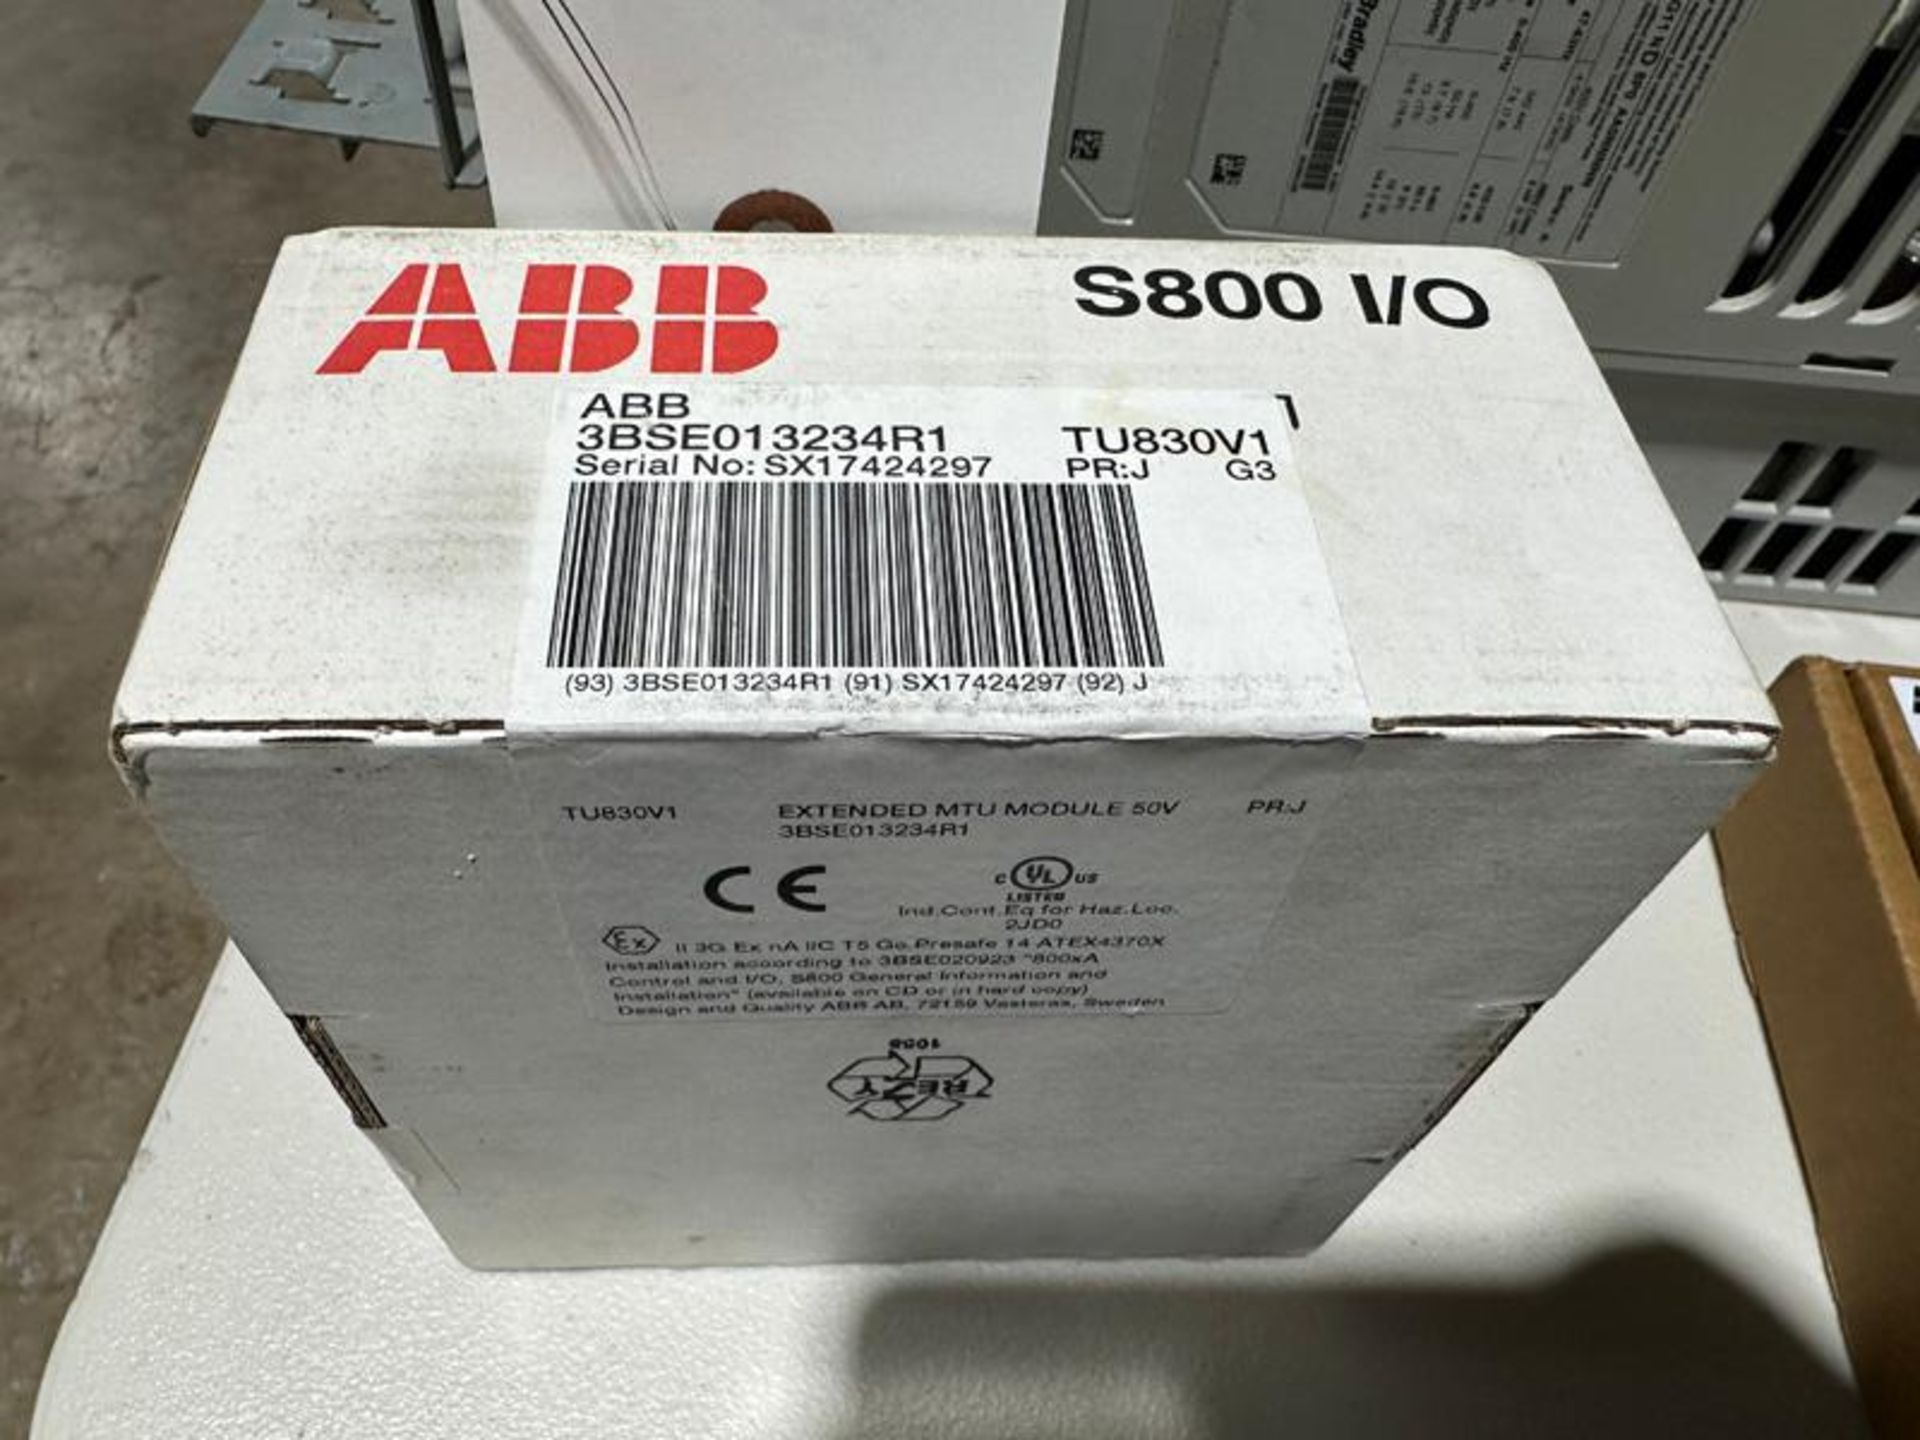 ABB 3BSE013234R1 S800 I-0 MODULE - Image 2 of 2